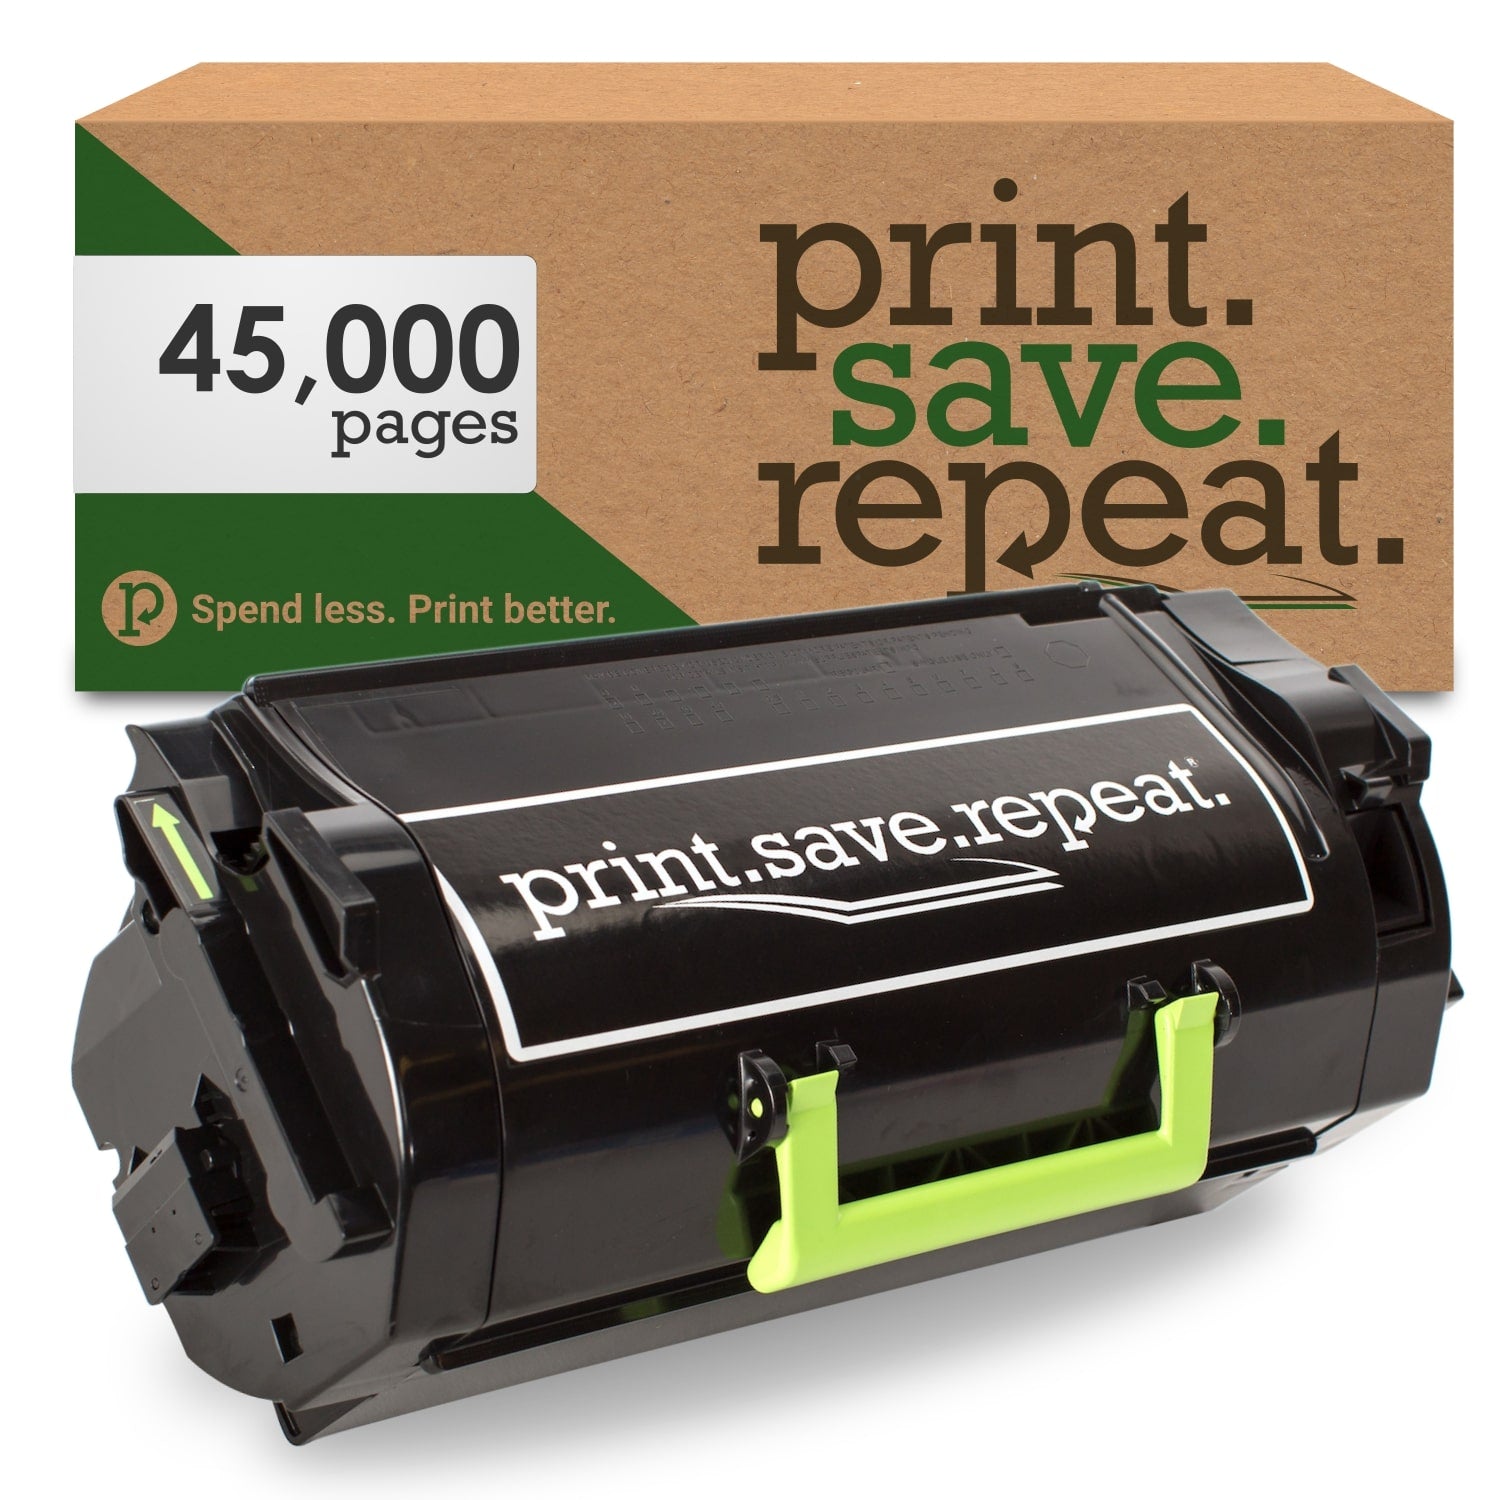 Print.Save.Repeat. Lexmark 521X Extra High Yield Remanufactured Toner Cartridge (52D1X00) for MS711, MS811, MS812 [45,000 Pages]